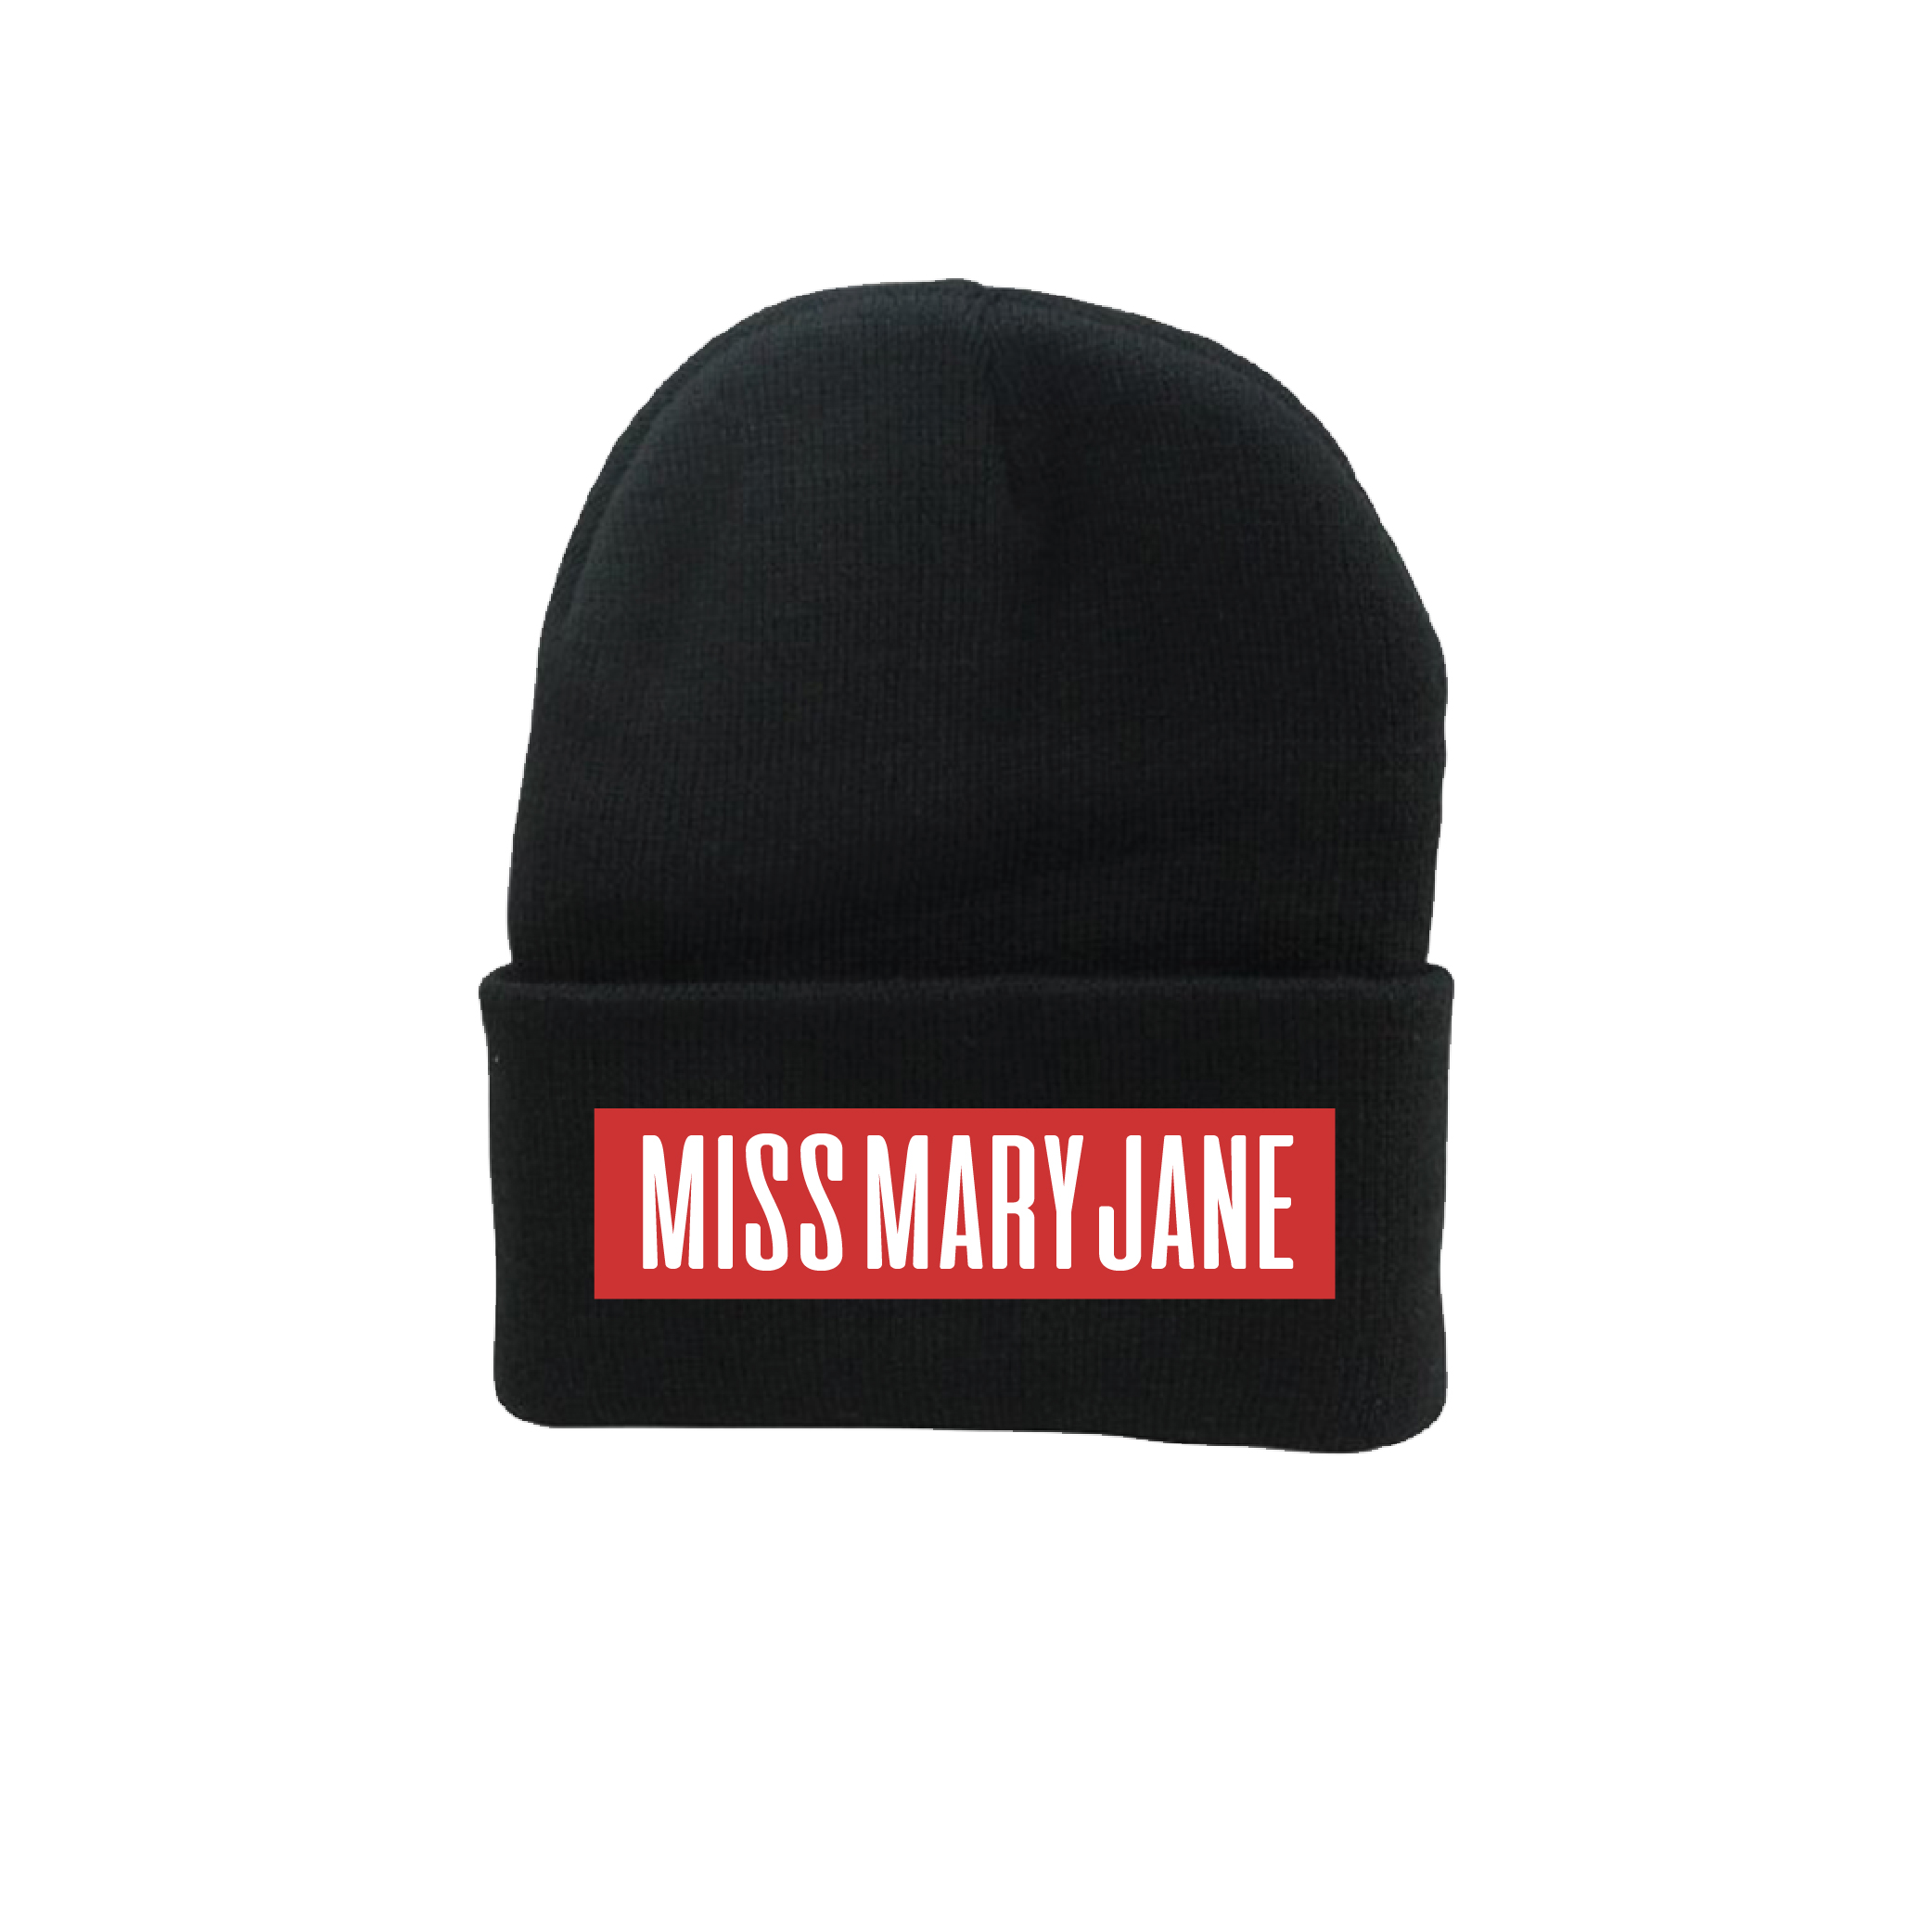 Miss Mary Jane Embroidered Beanie